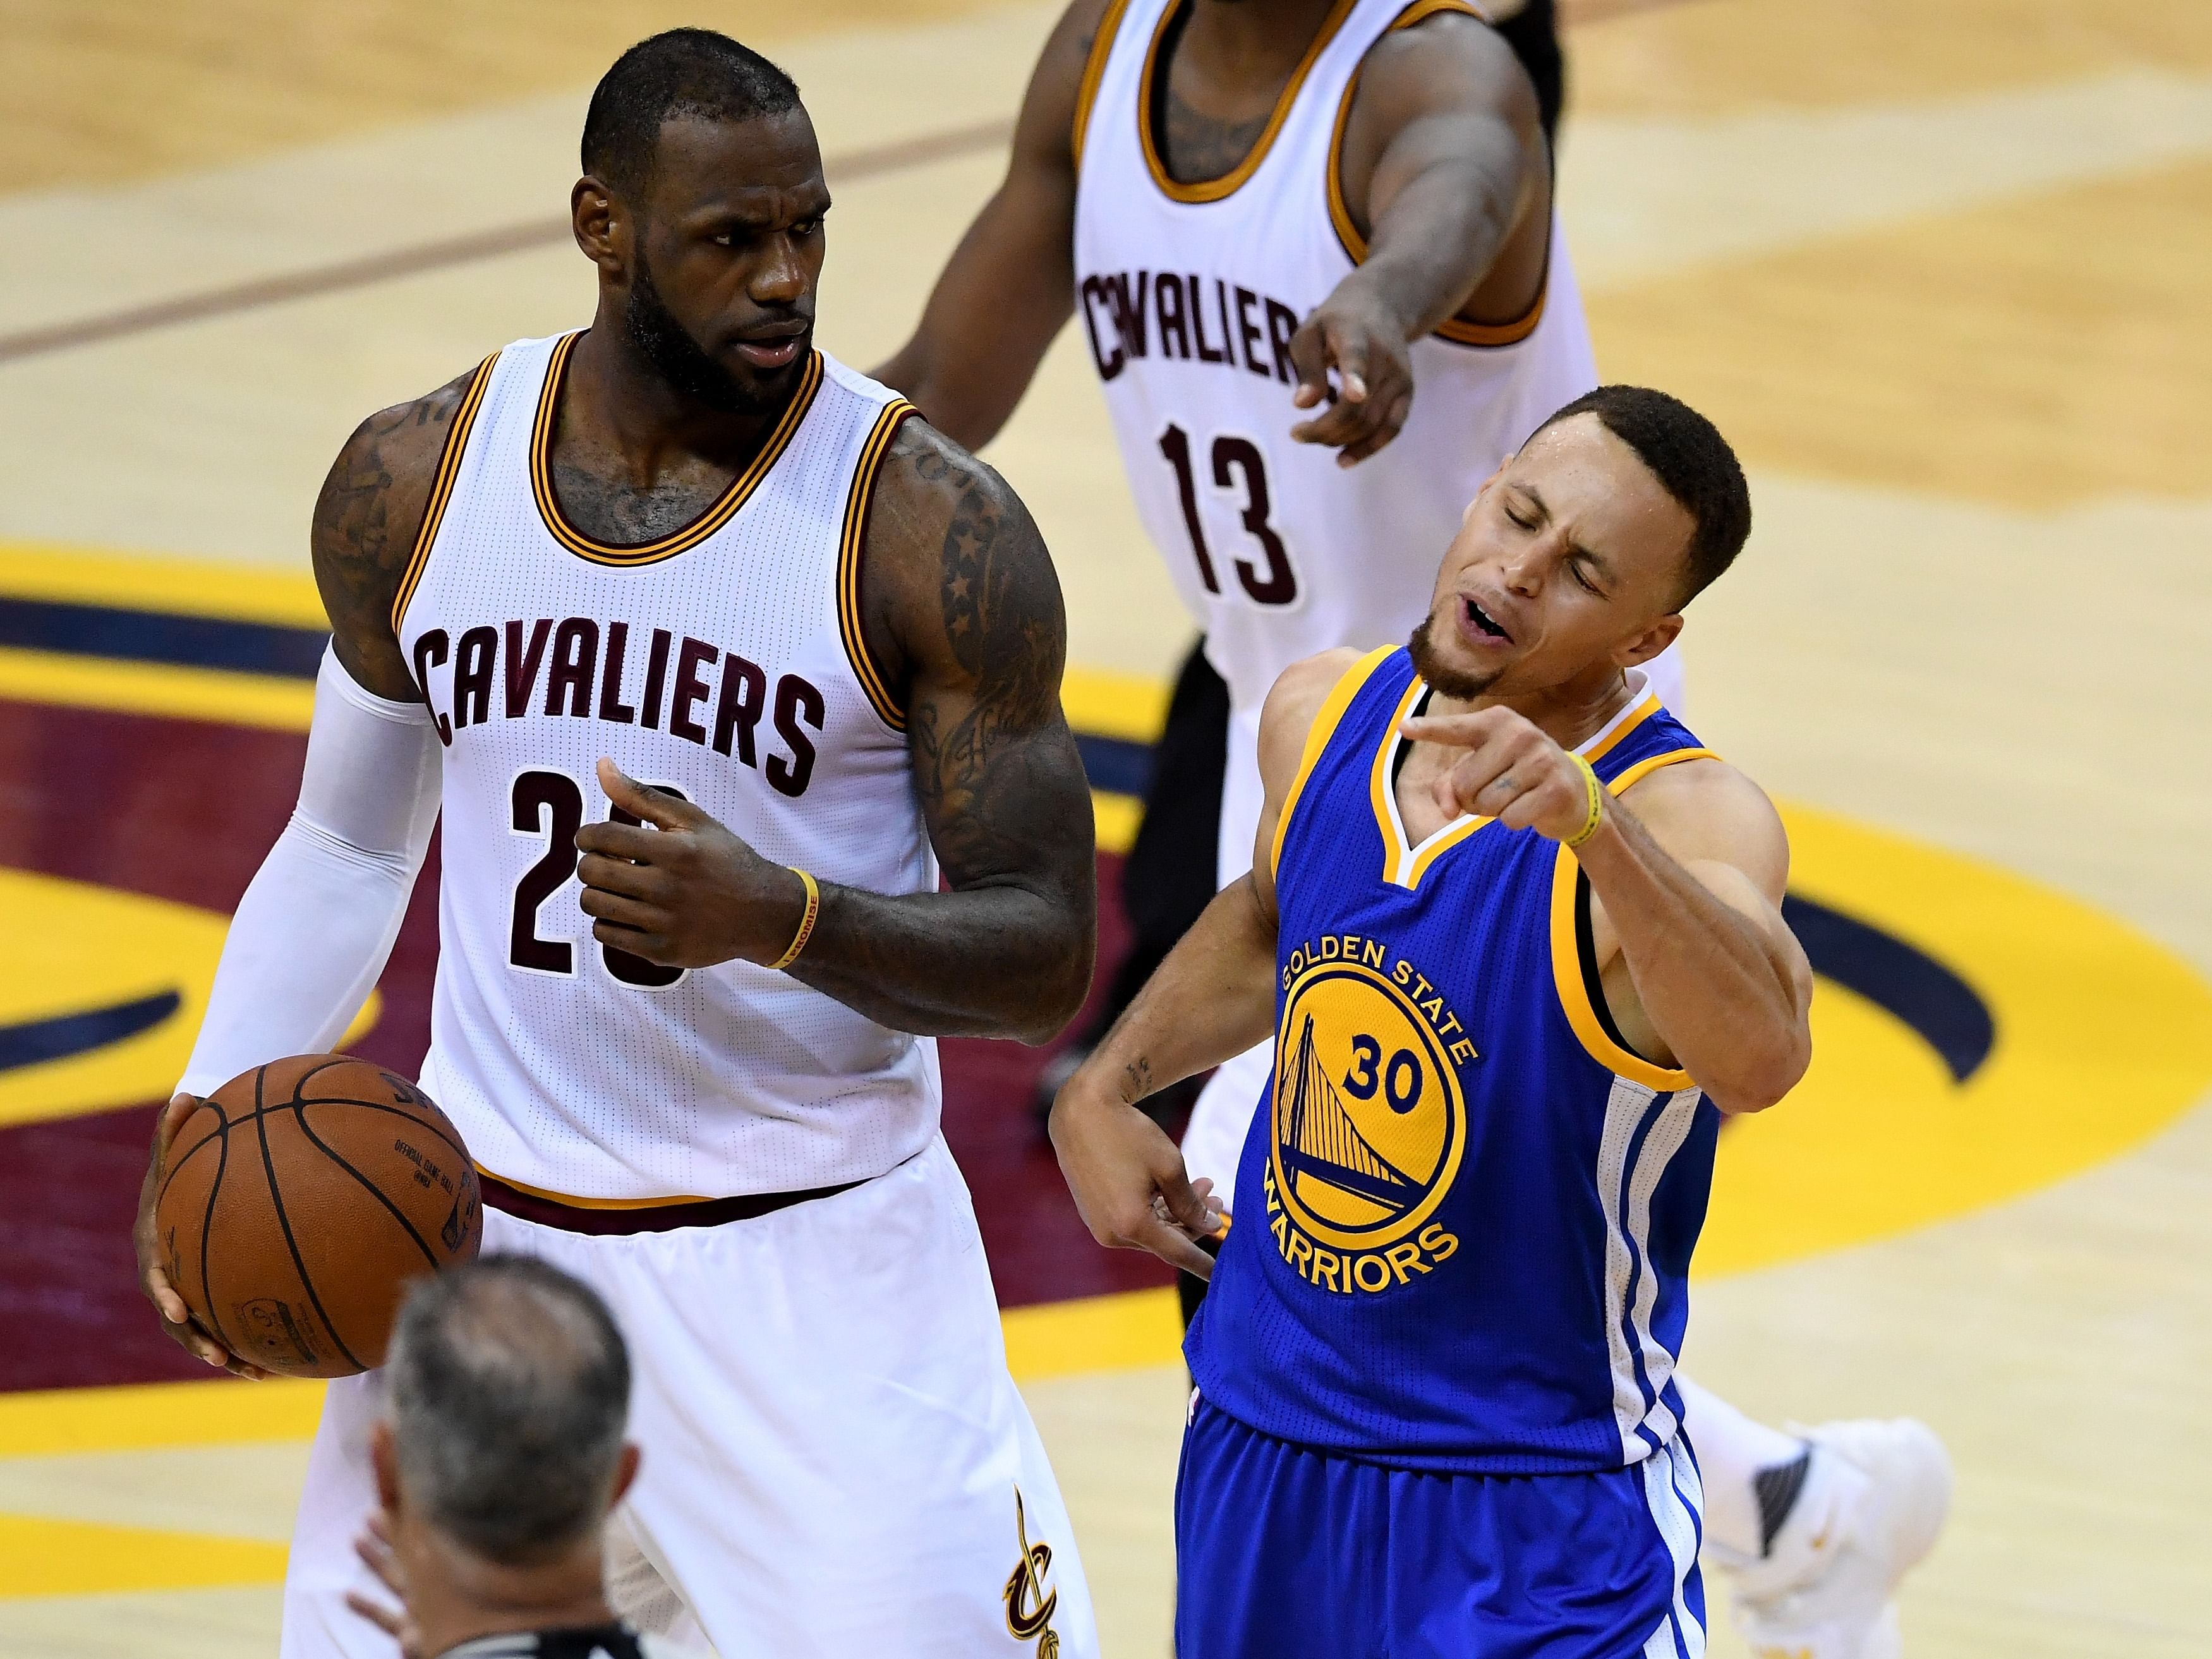 Cavs had no Kyrie, no Kevin Love… Stephen A. and I could have started” -  Chris 'Mad Dog' Russo believes Steph Curry doesn't deserve any credit for  beating the “nonsense” 2015 Cavaliers